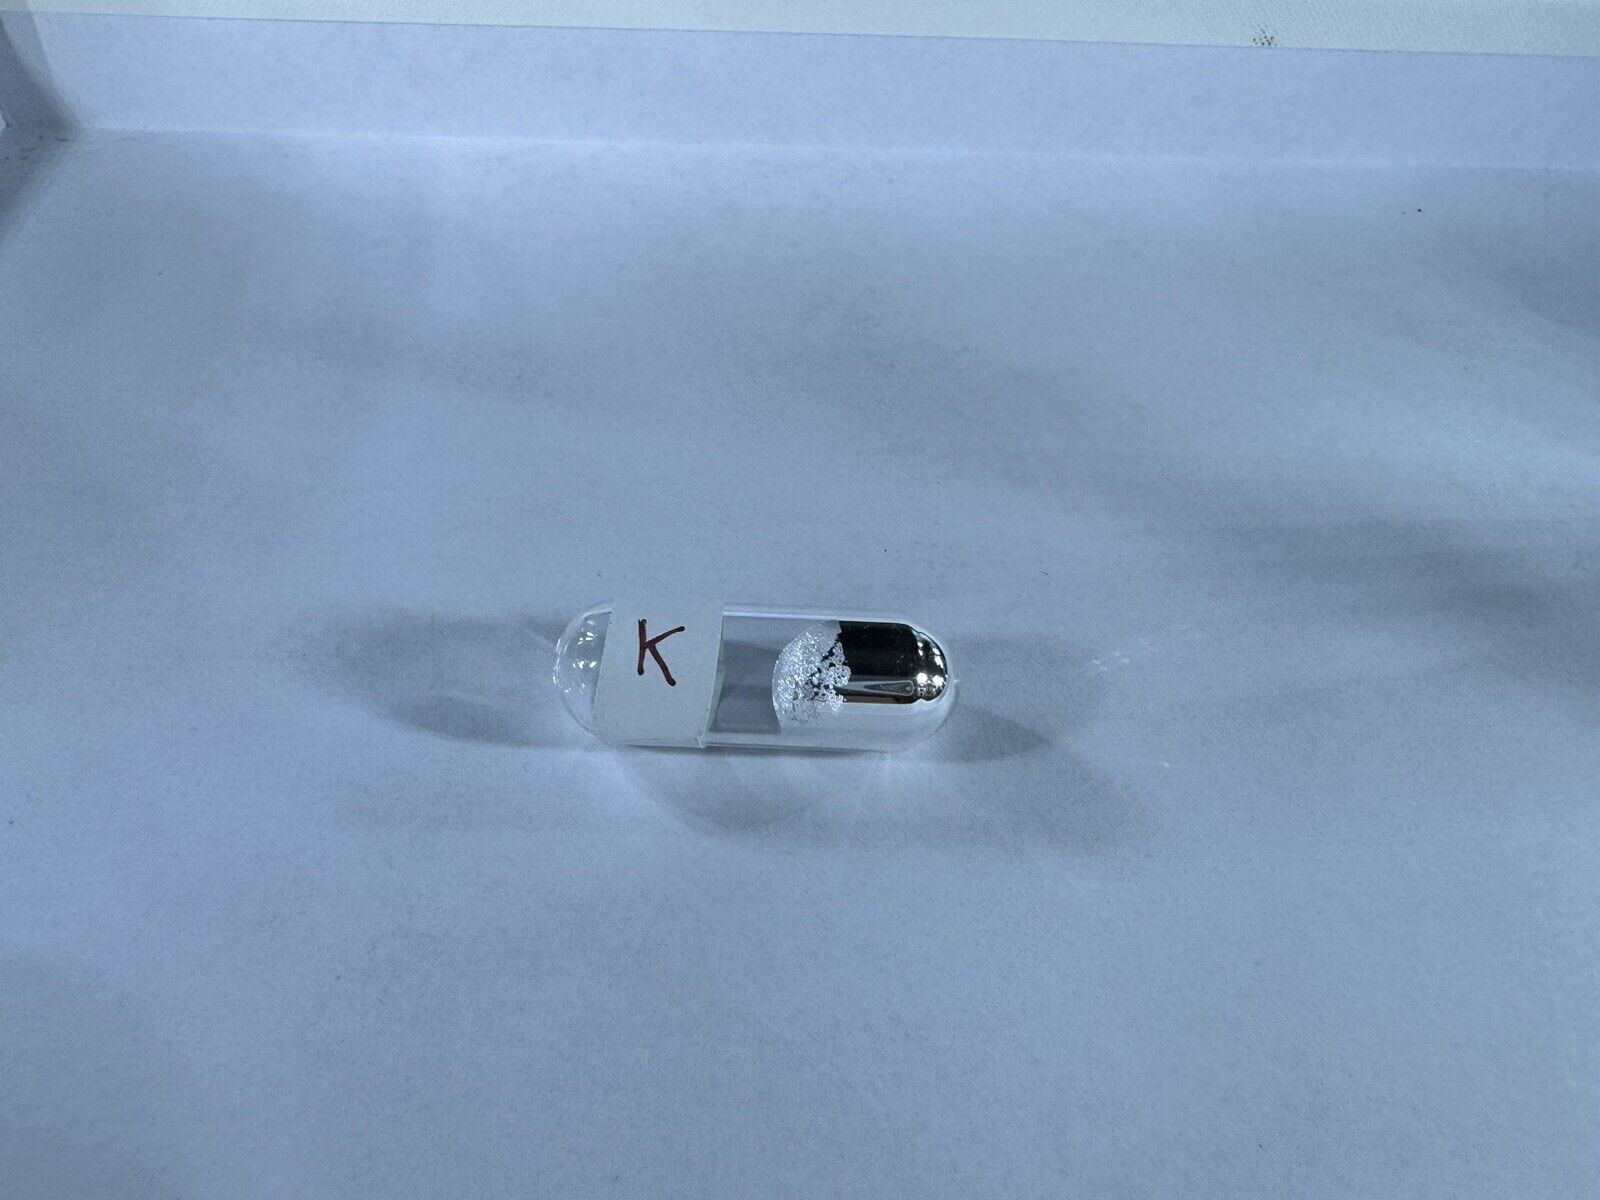 Potassium Metal Element Sample Sealed In Ampoule (FREE SHIPPING)